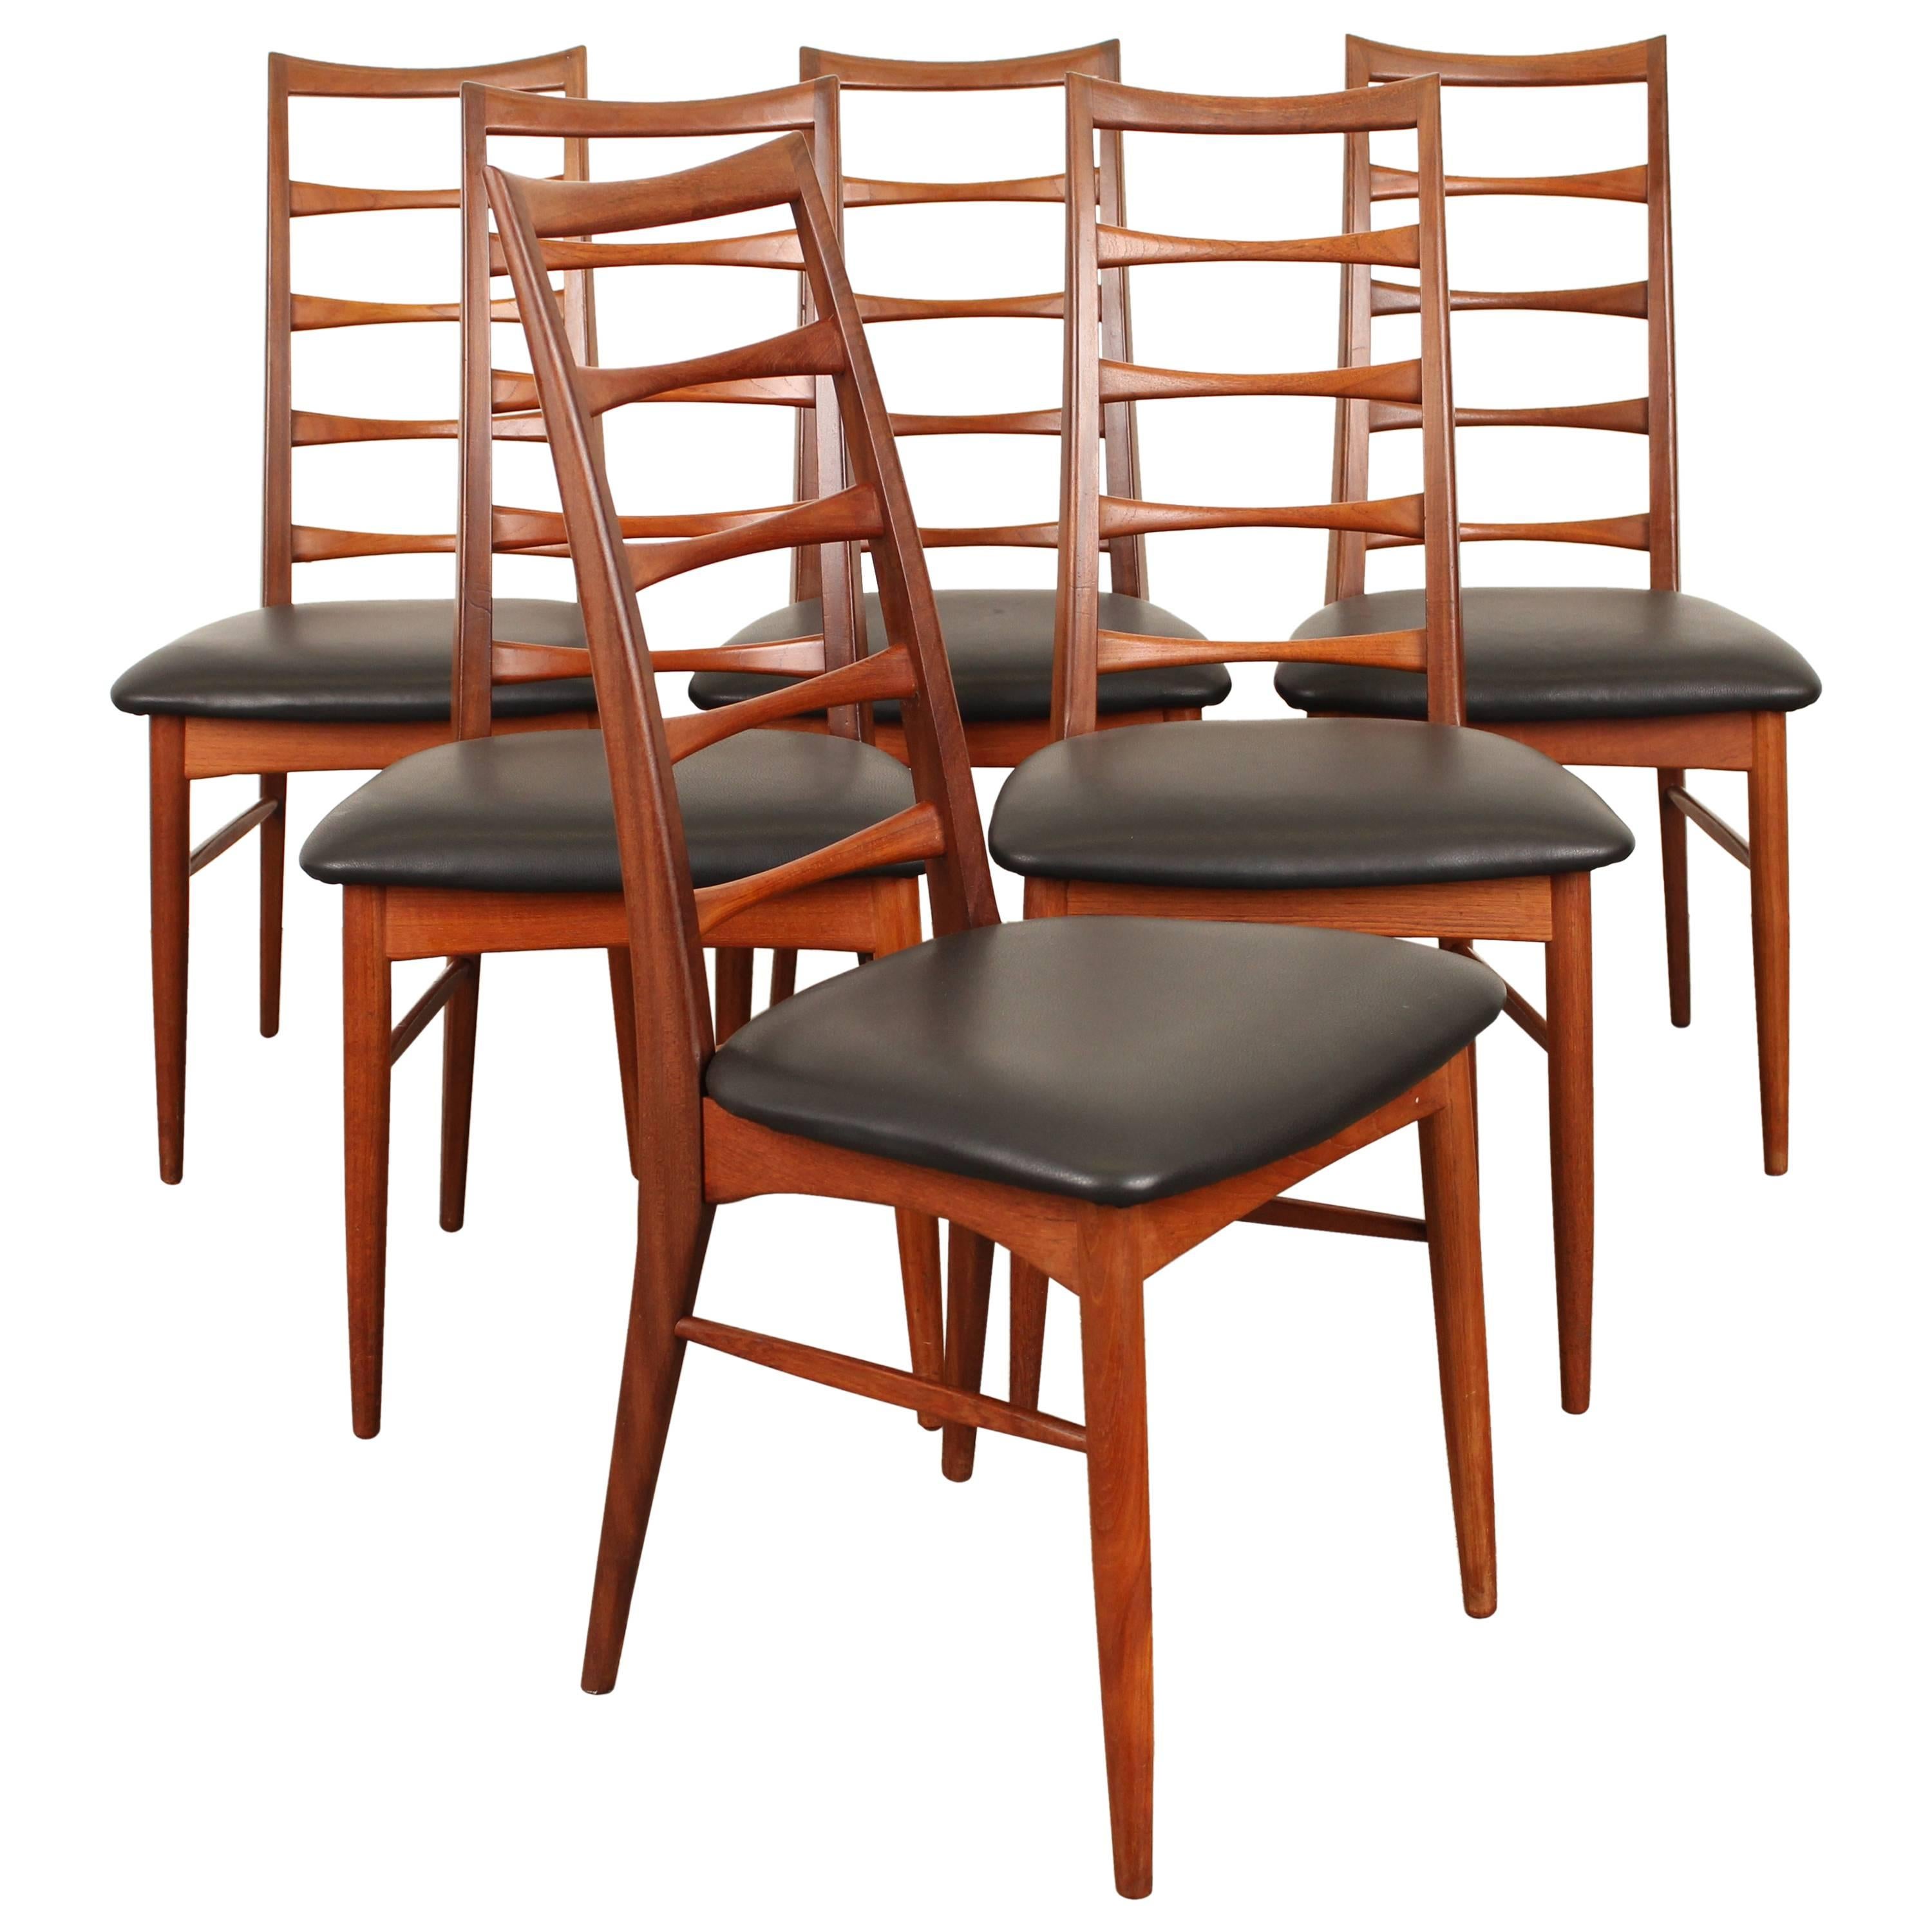 Set of Six Tall Ladder-Back Teak and Leather Dining Chairs by Niels Kofoed